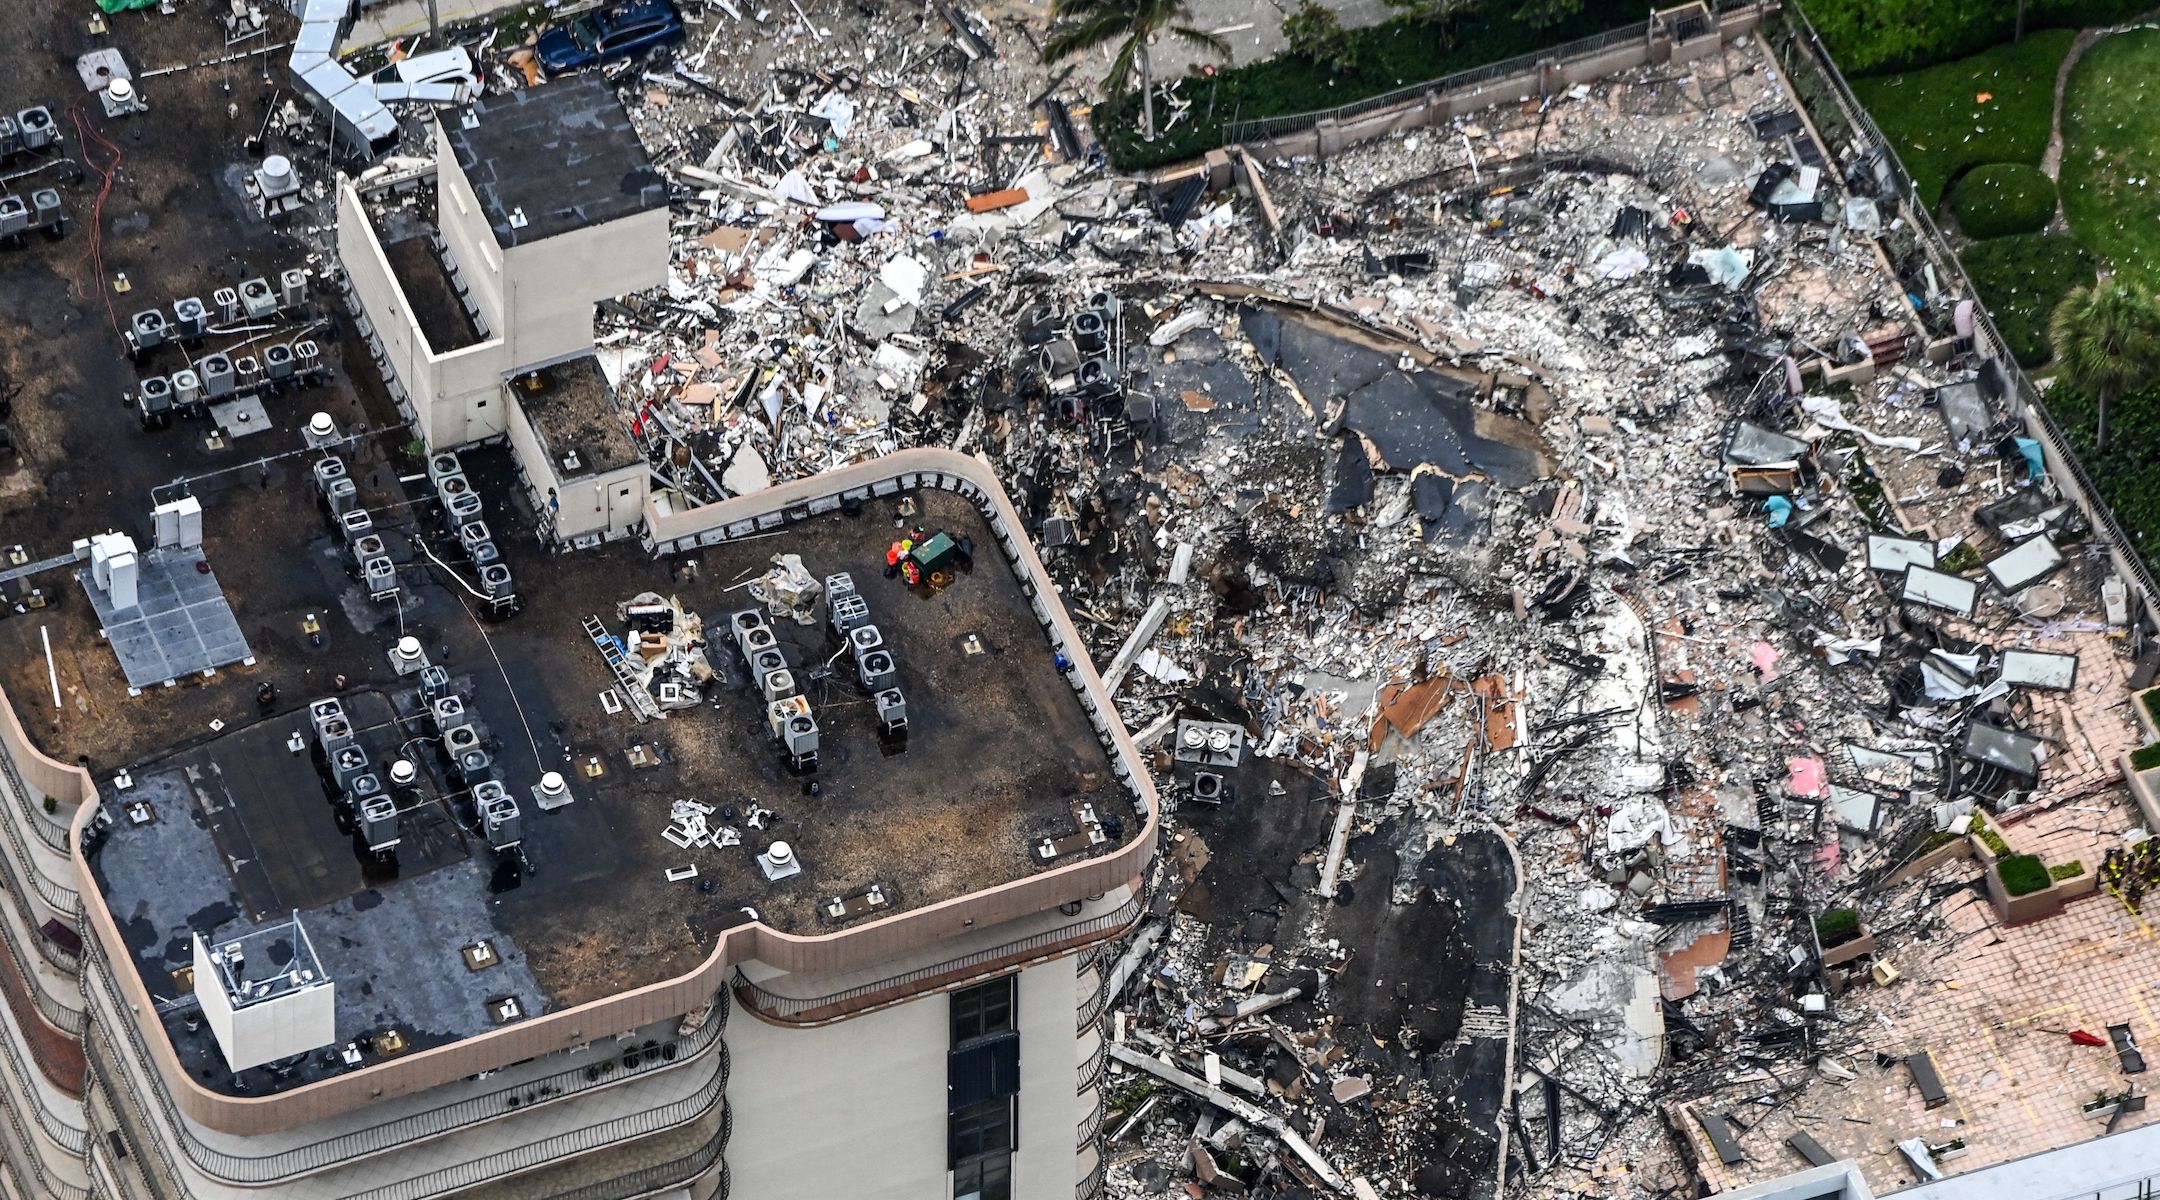 Search and rescue personnel working on site after the partial collapse of the Champlain Towers South in Surfside, Florida on June 24, 2021. (Chandan Khanna/AFP via Getty Images)